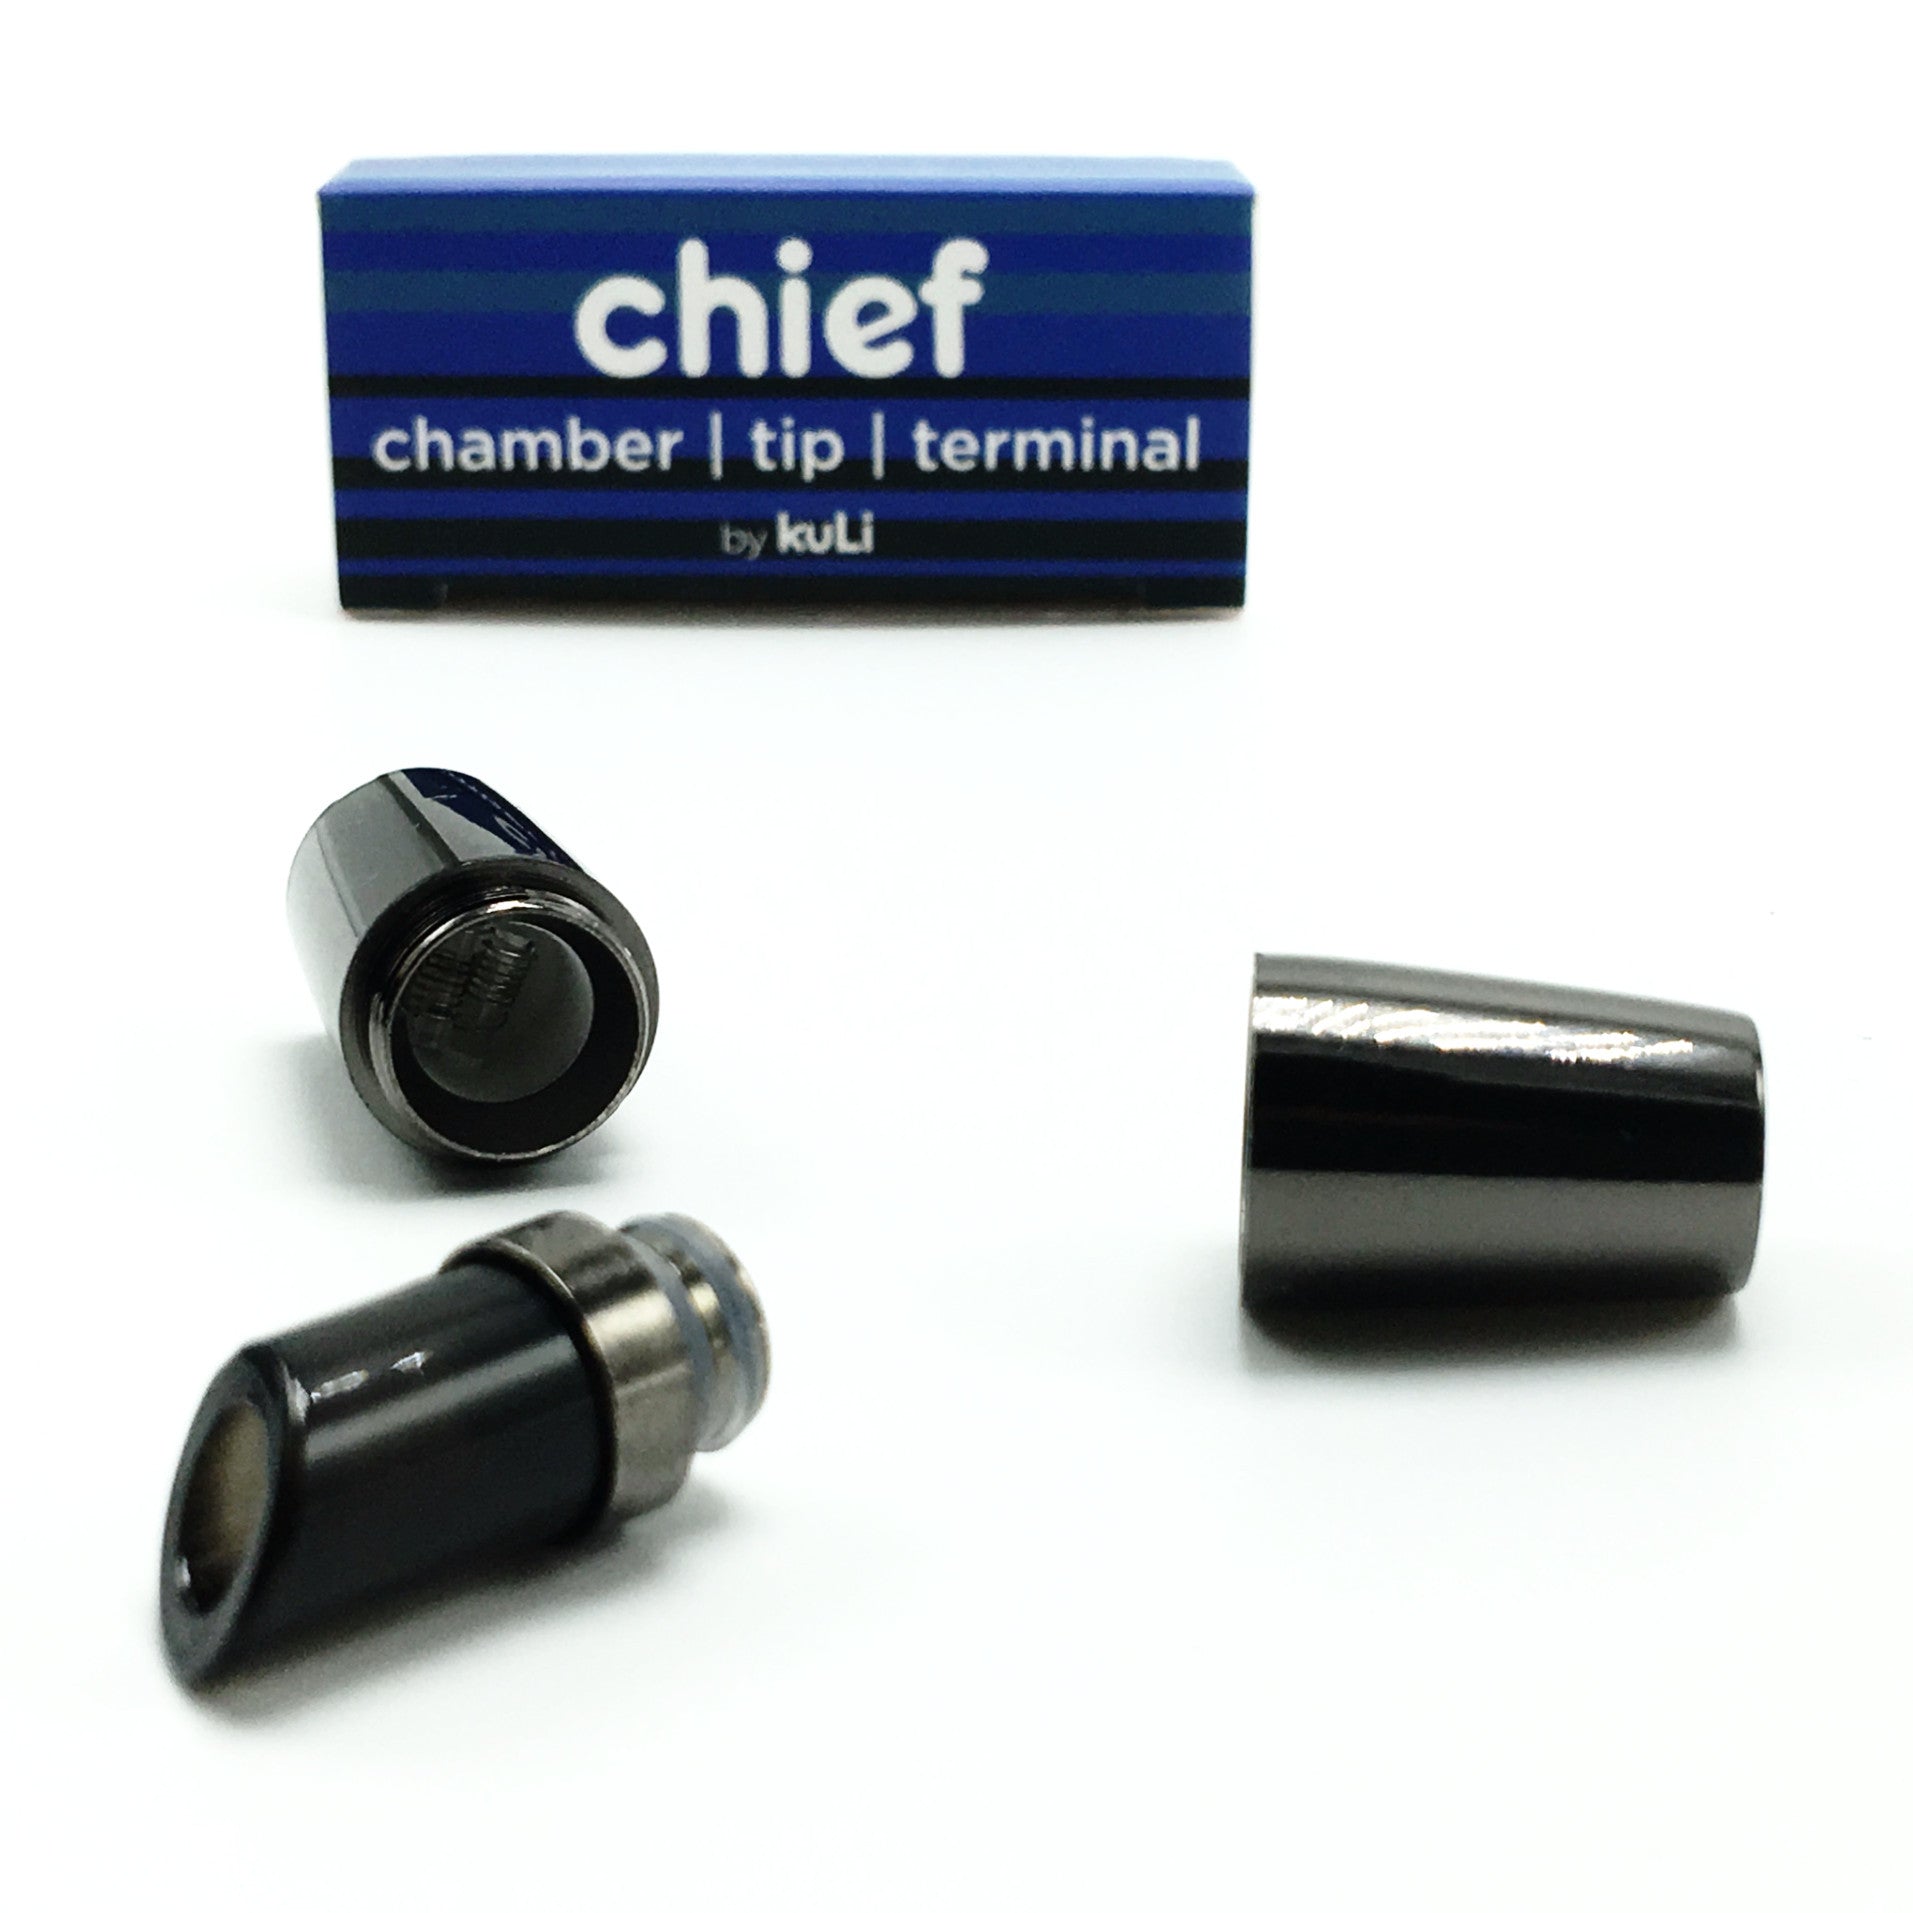 replacement chief chamber | tip | terminal